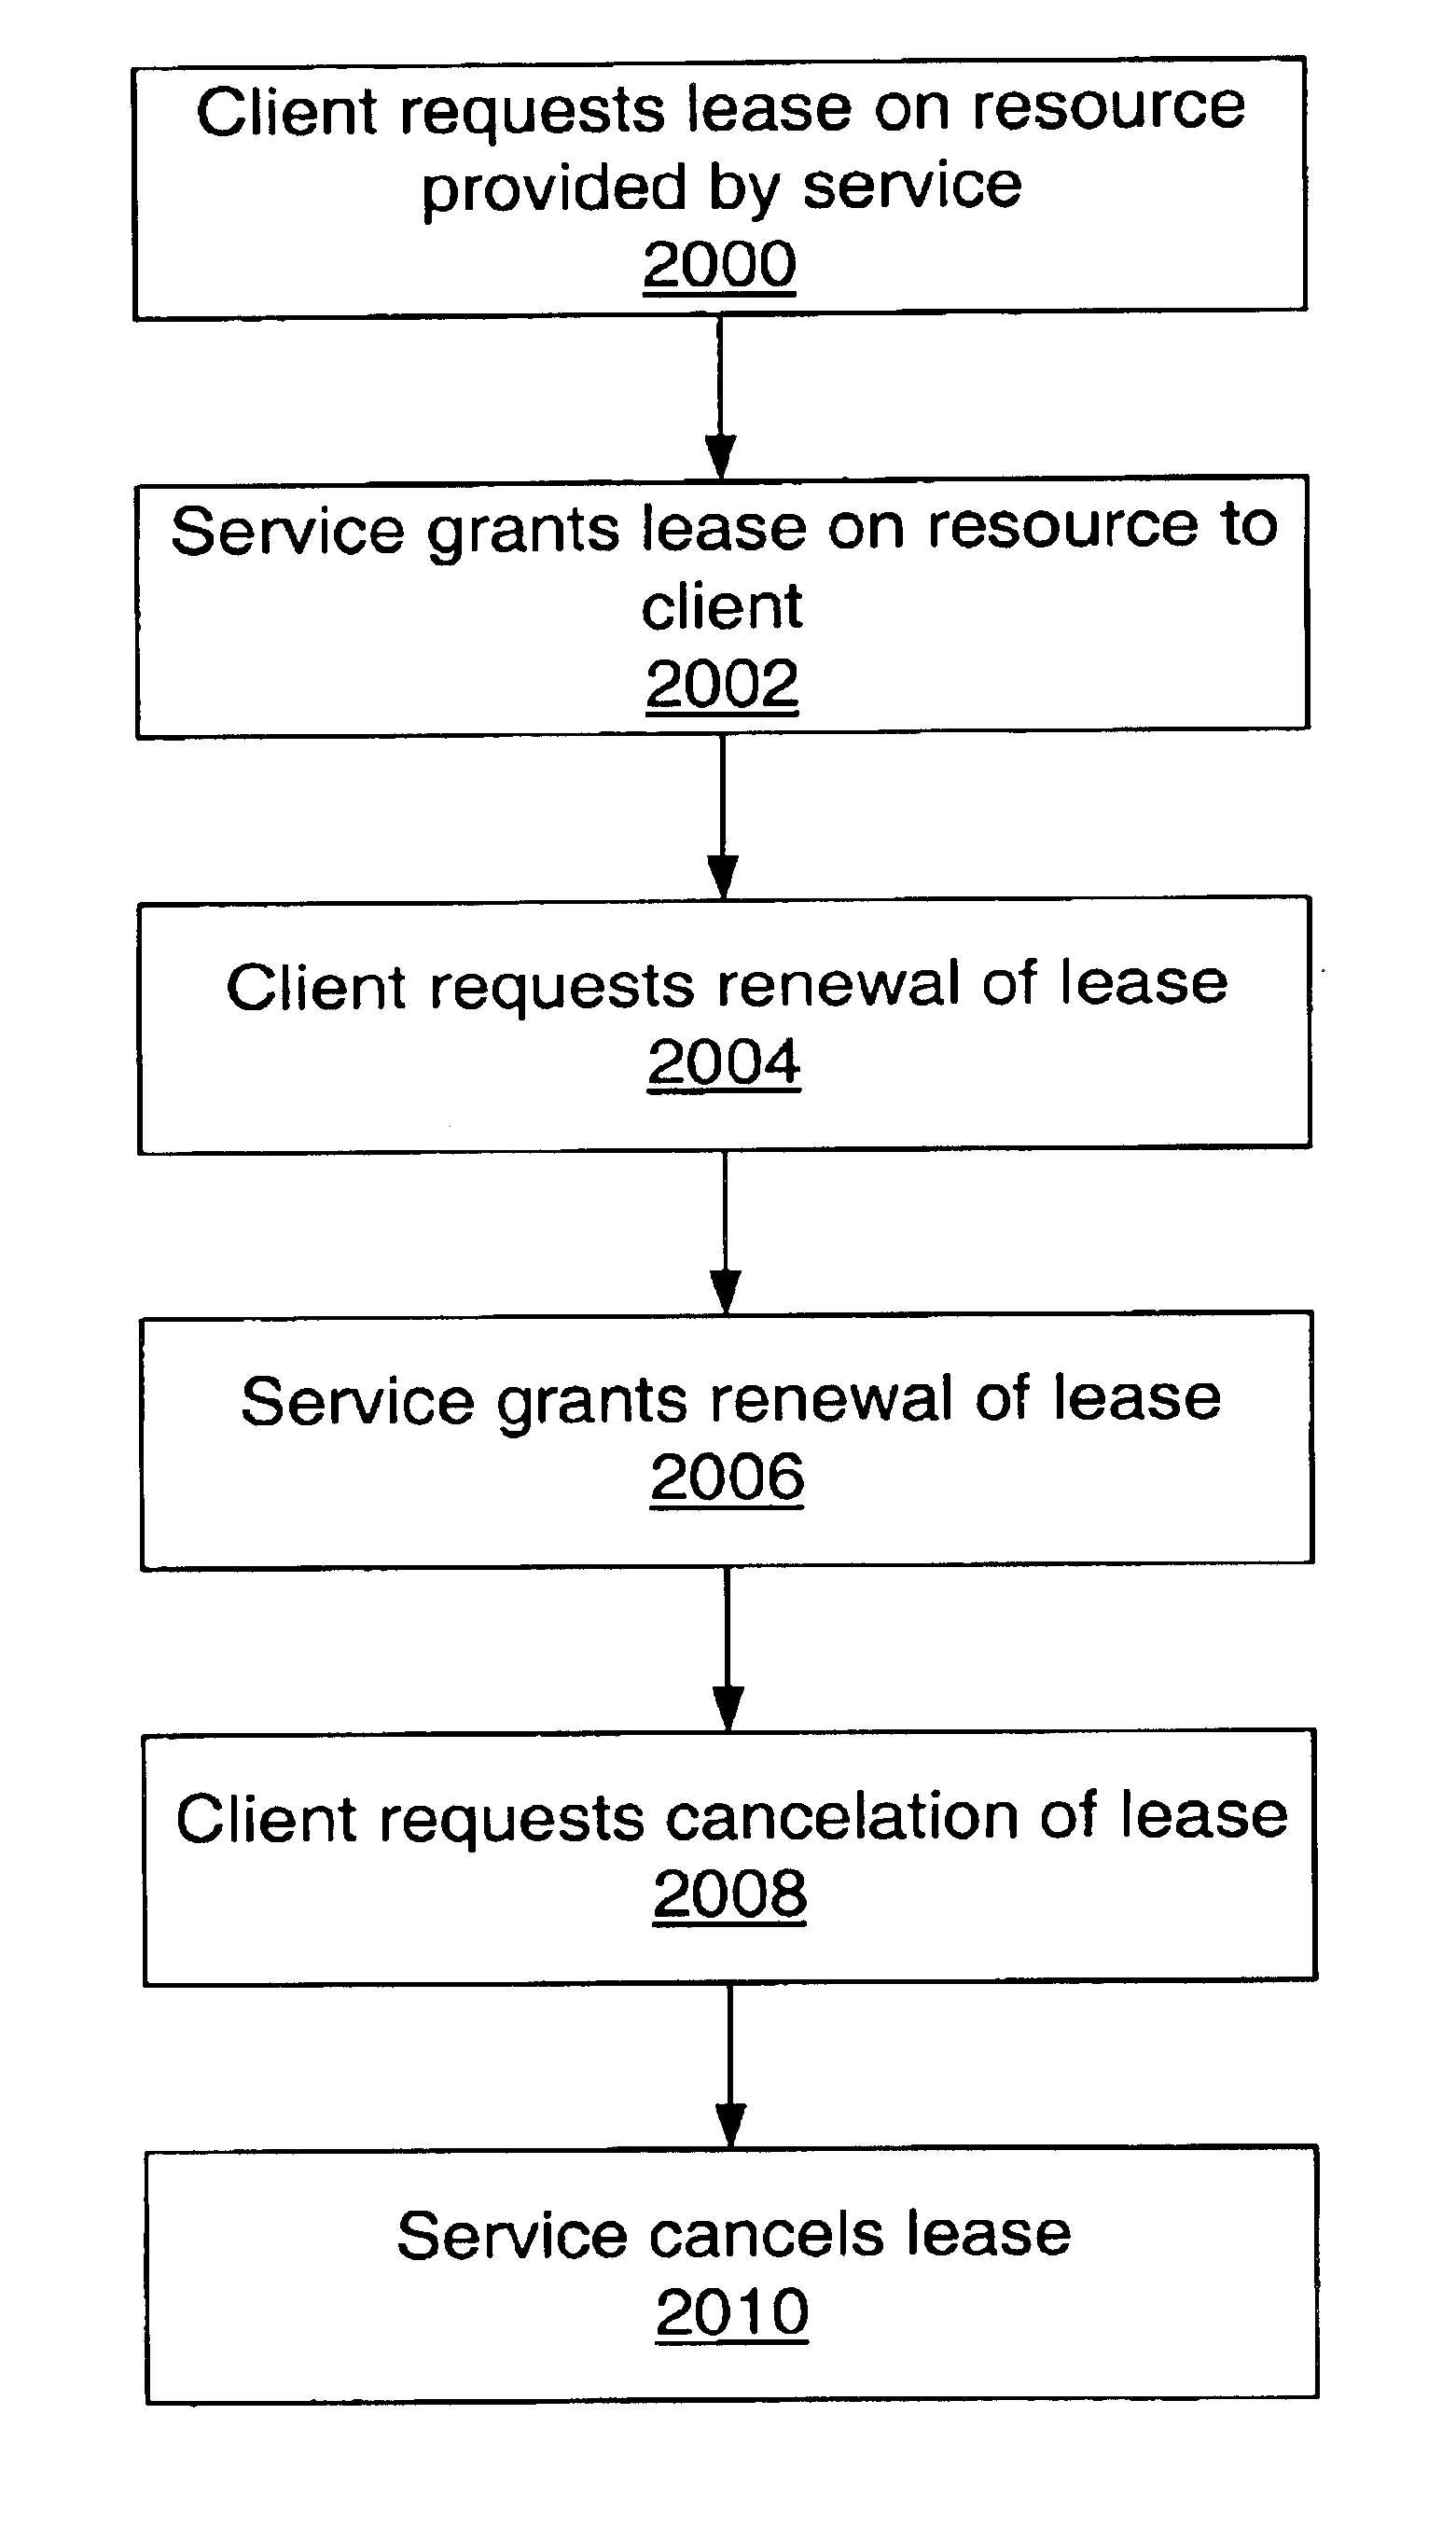 Message-based leasing of resources in a distributed computing environment